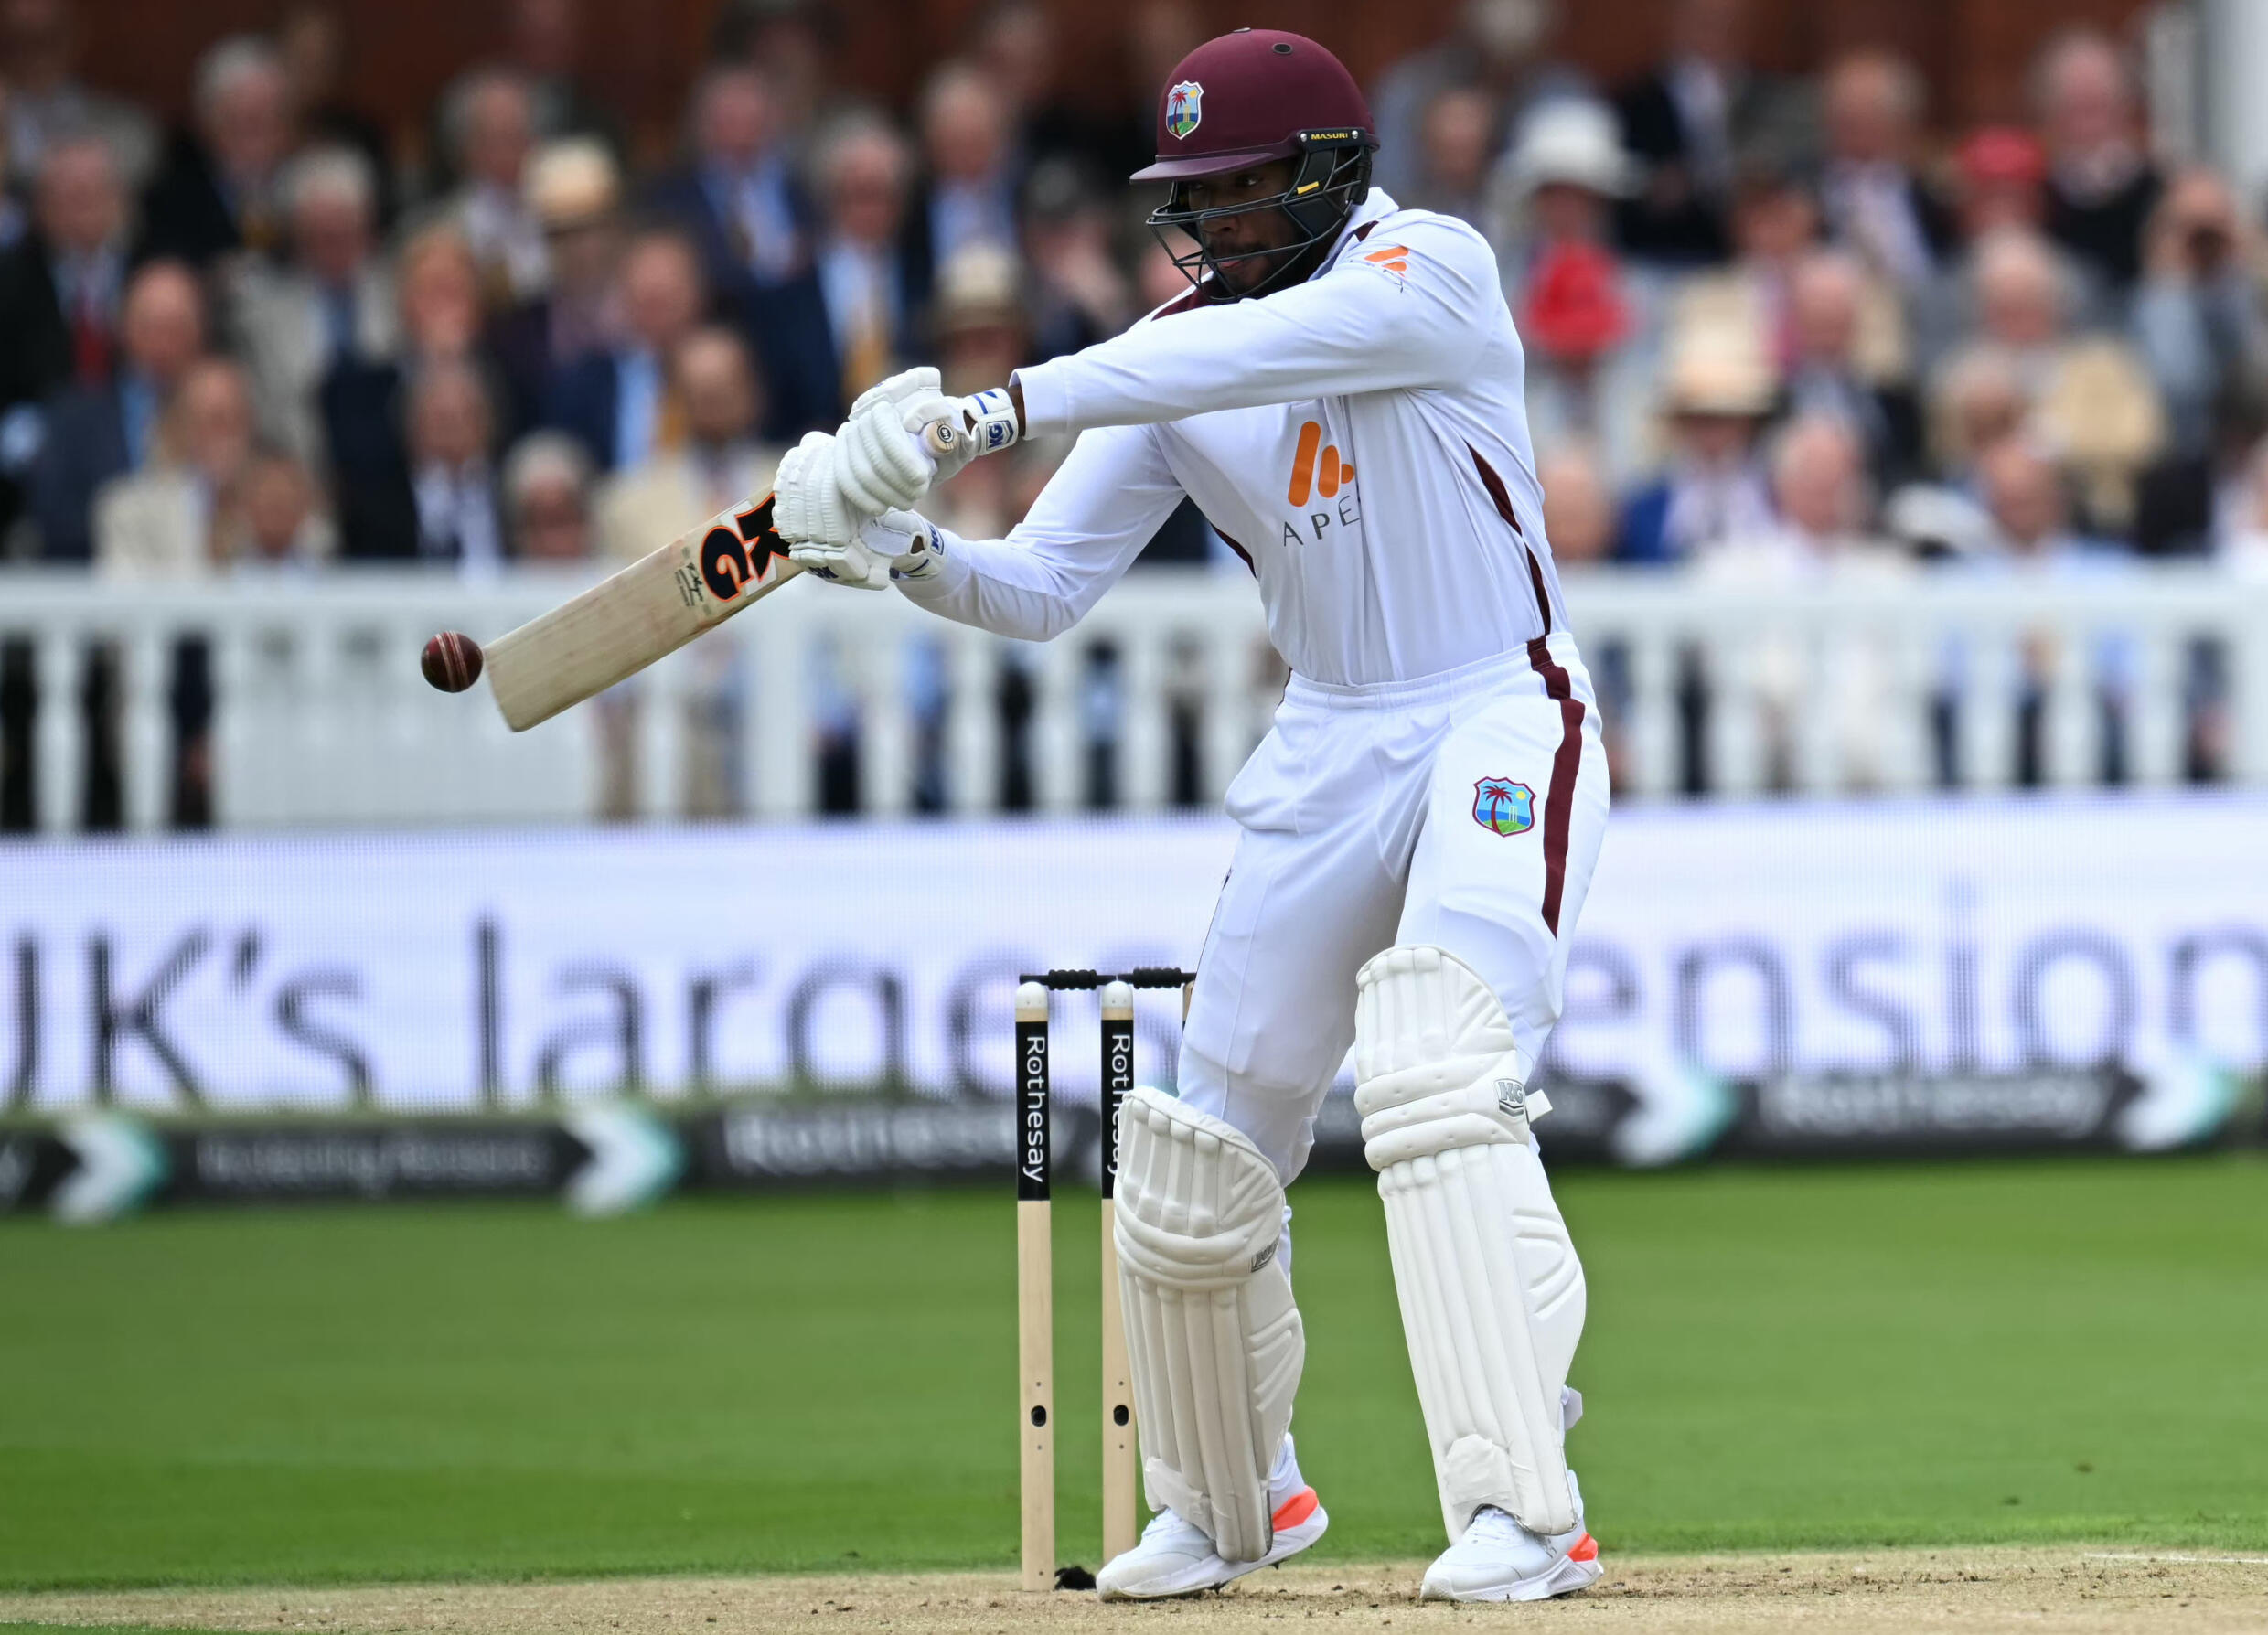 Brathwaite buoyed by Australia recovery after England rout